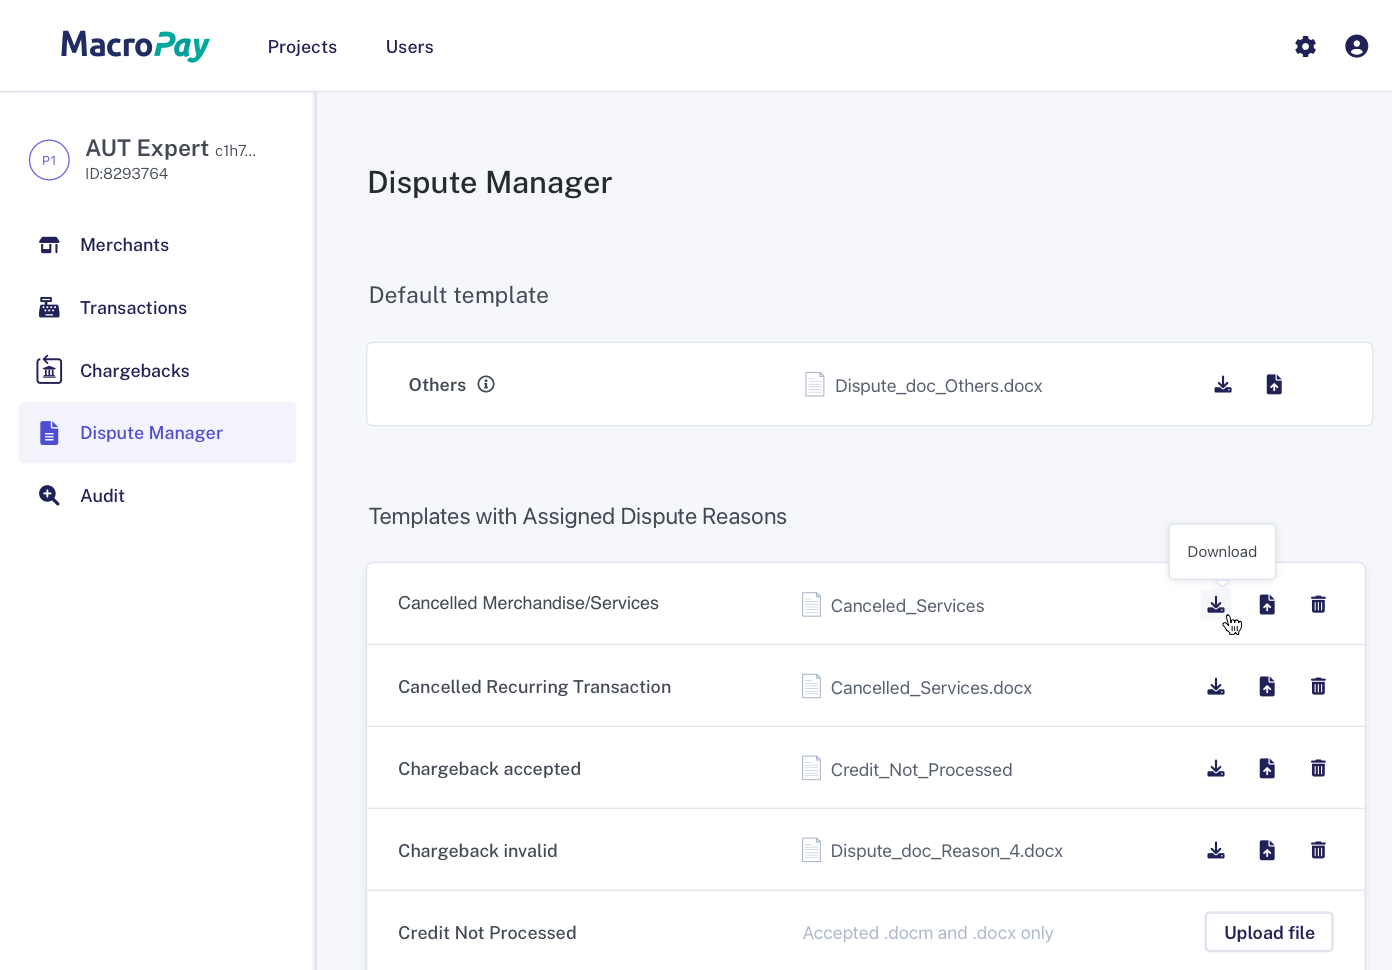 The dispute manager screen shows how you can download a chargeback dispute template.